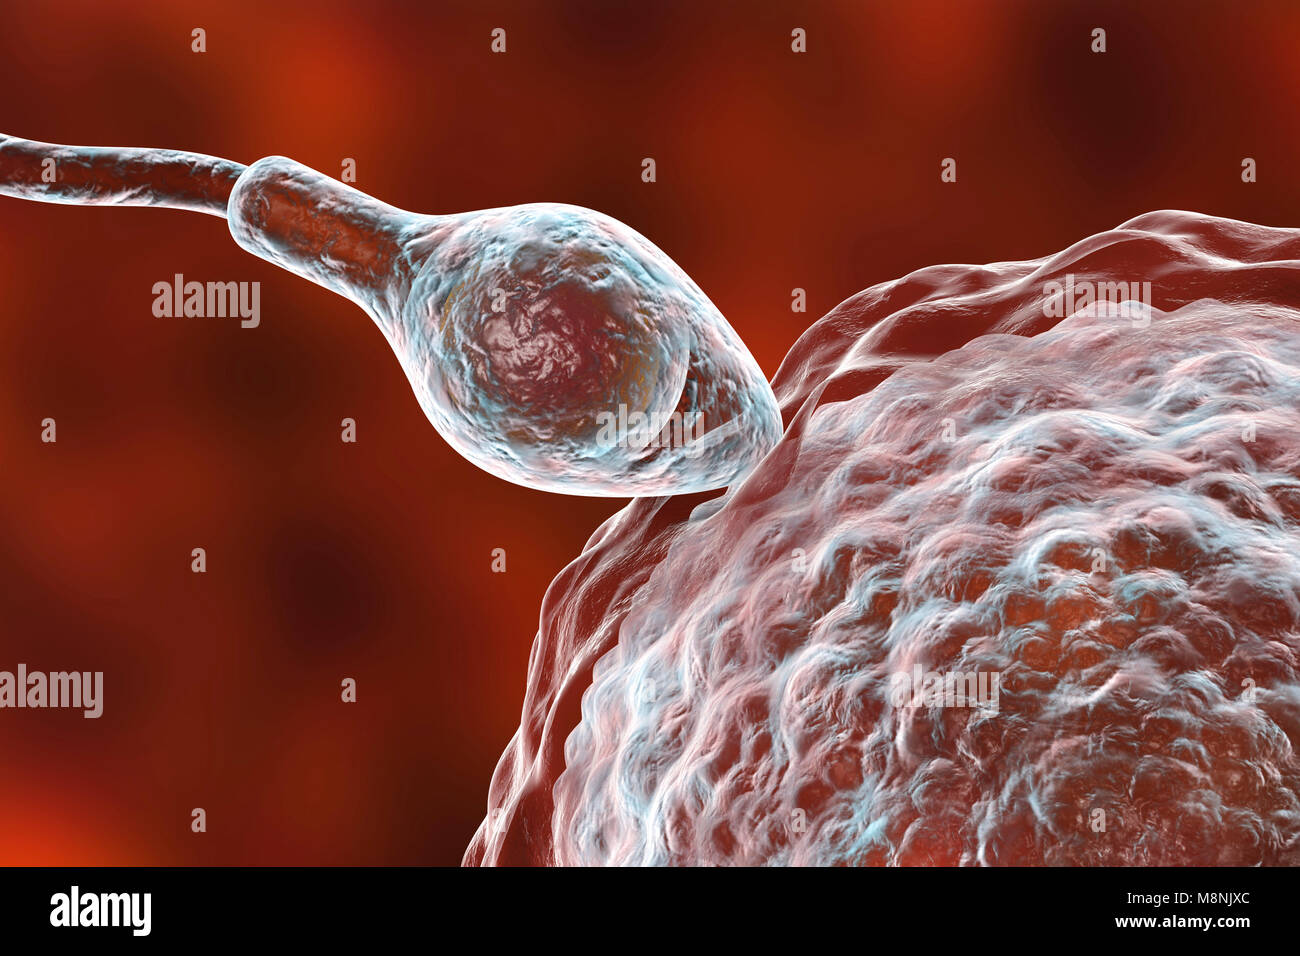 Human ovum, or egg, surrounded by numerous spermatozoa, computer ...